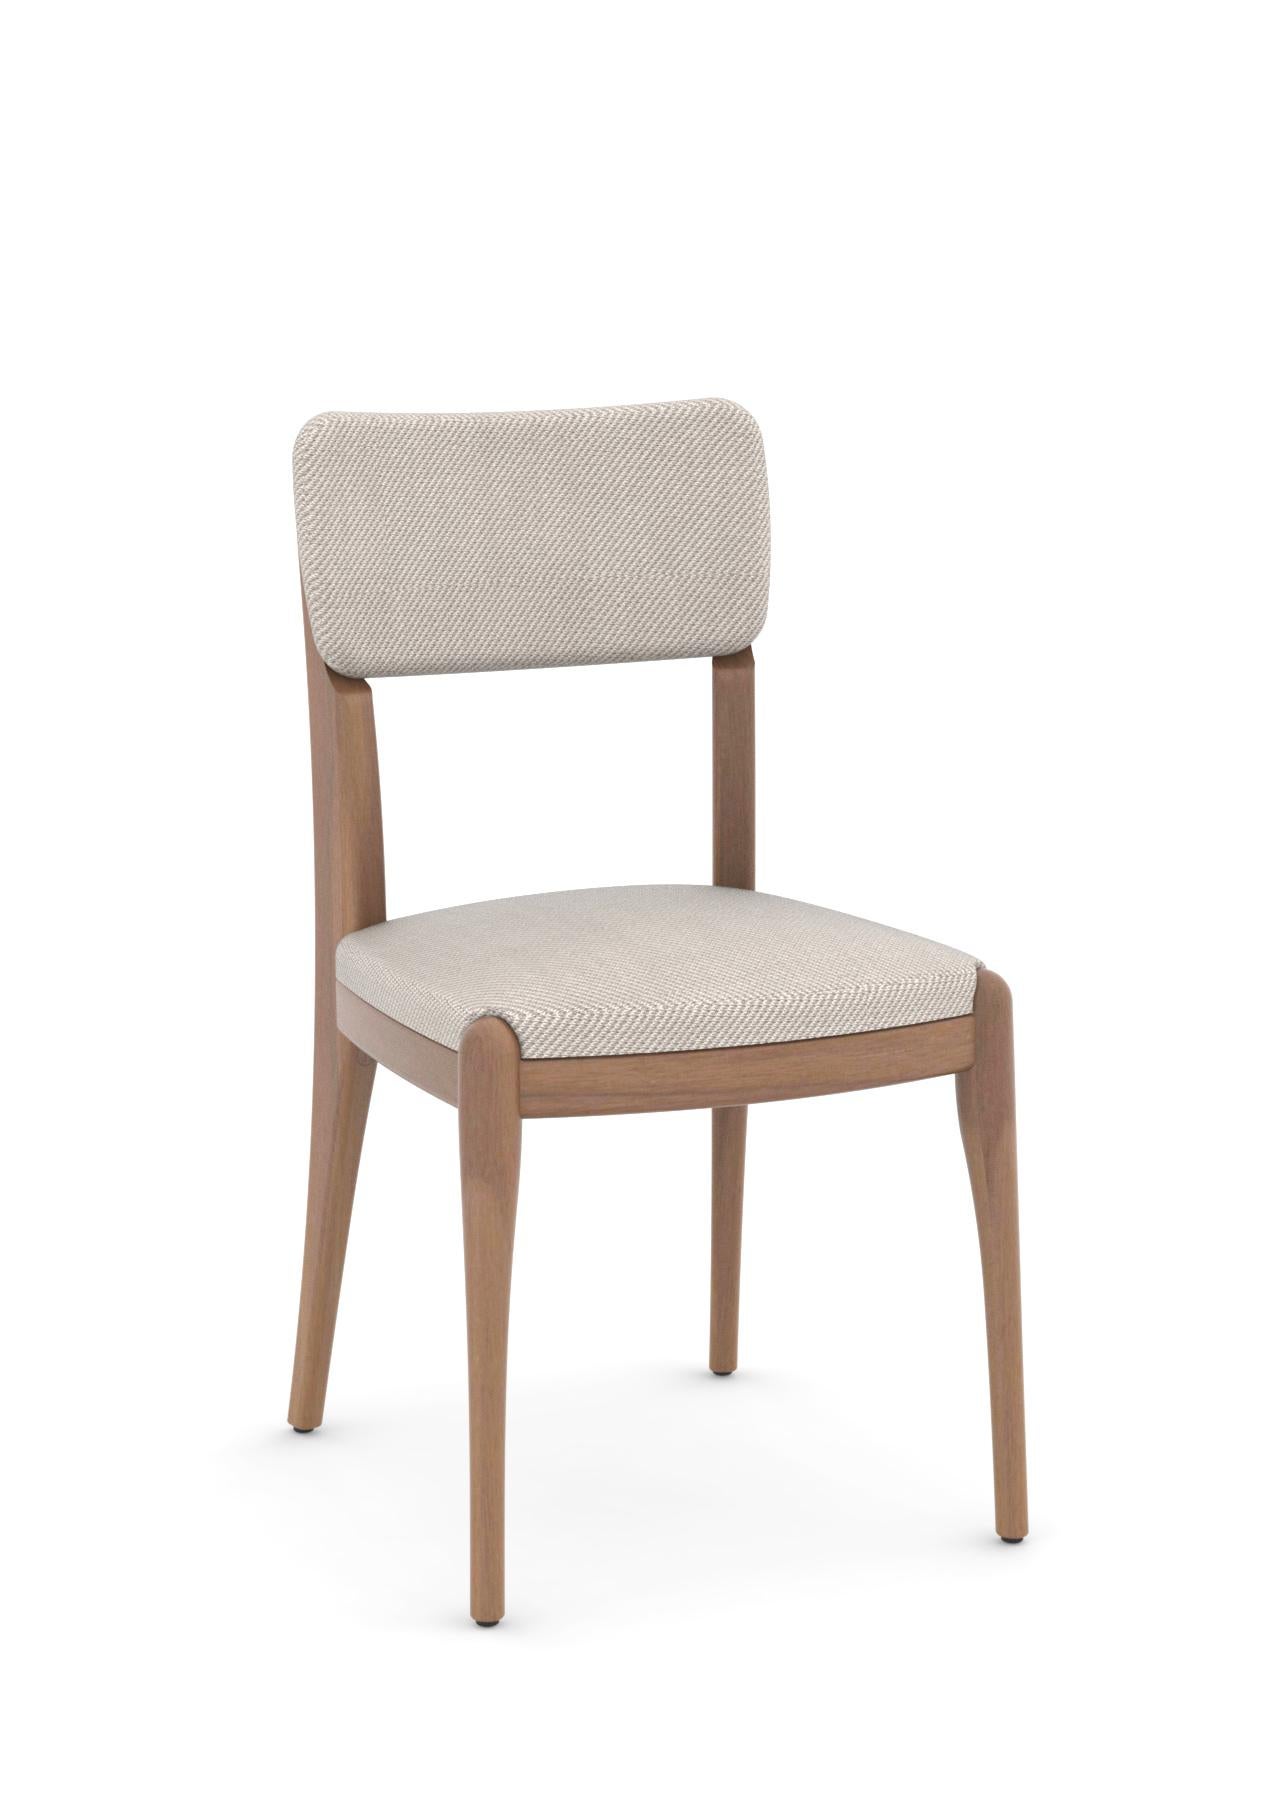 Finchdean is designed by Sjoerd Vroonland & Casper Vissers for Revised
The Finchdean dining chair is crafted from solid wood with a polyurethane foam seat and backrest upholstered in multiple fabric options. The backrest features powdercoated bolts.